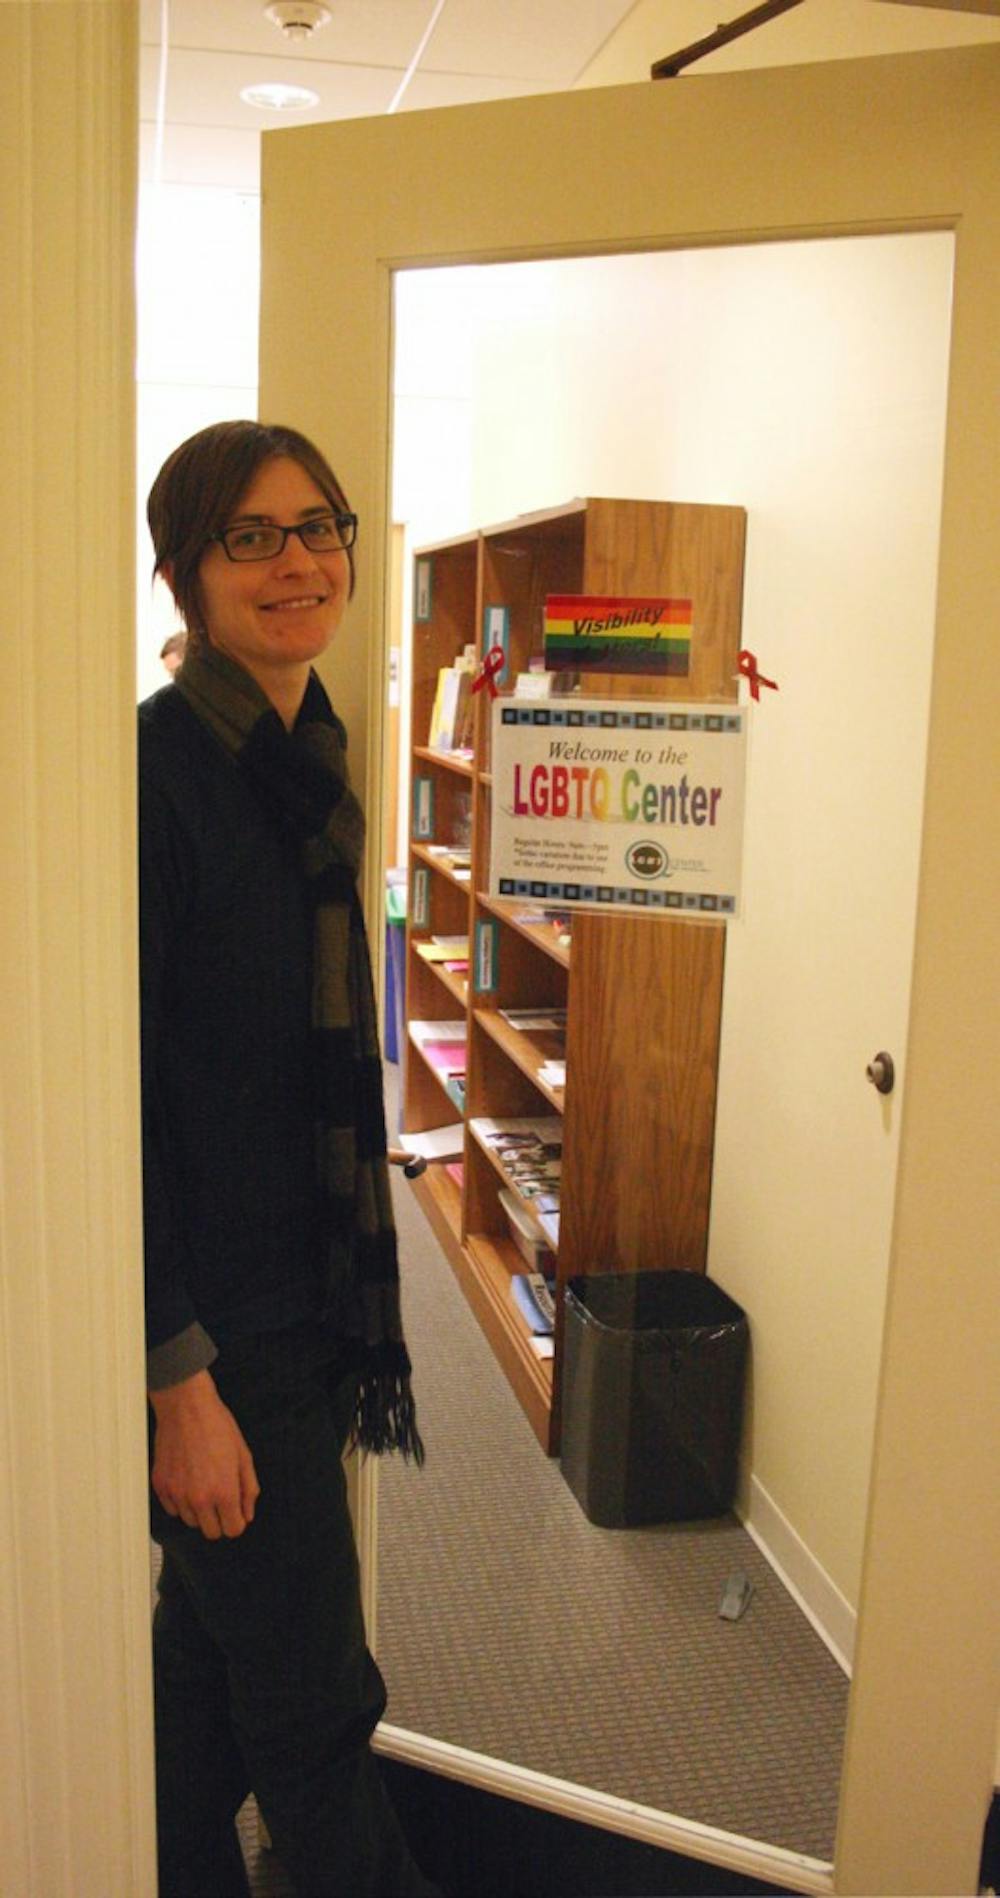 Danny DePuy, assistant director of the Lesbian, Gay, Bisexual, Transgender and Queer Center, stands at its door.  She thinks there needs to be more education about cyber bullying effects.